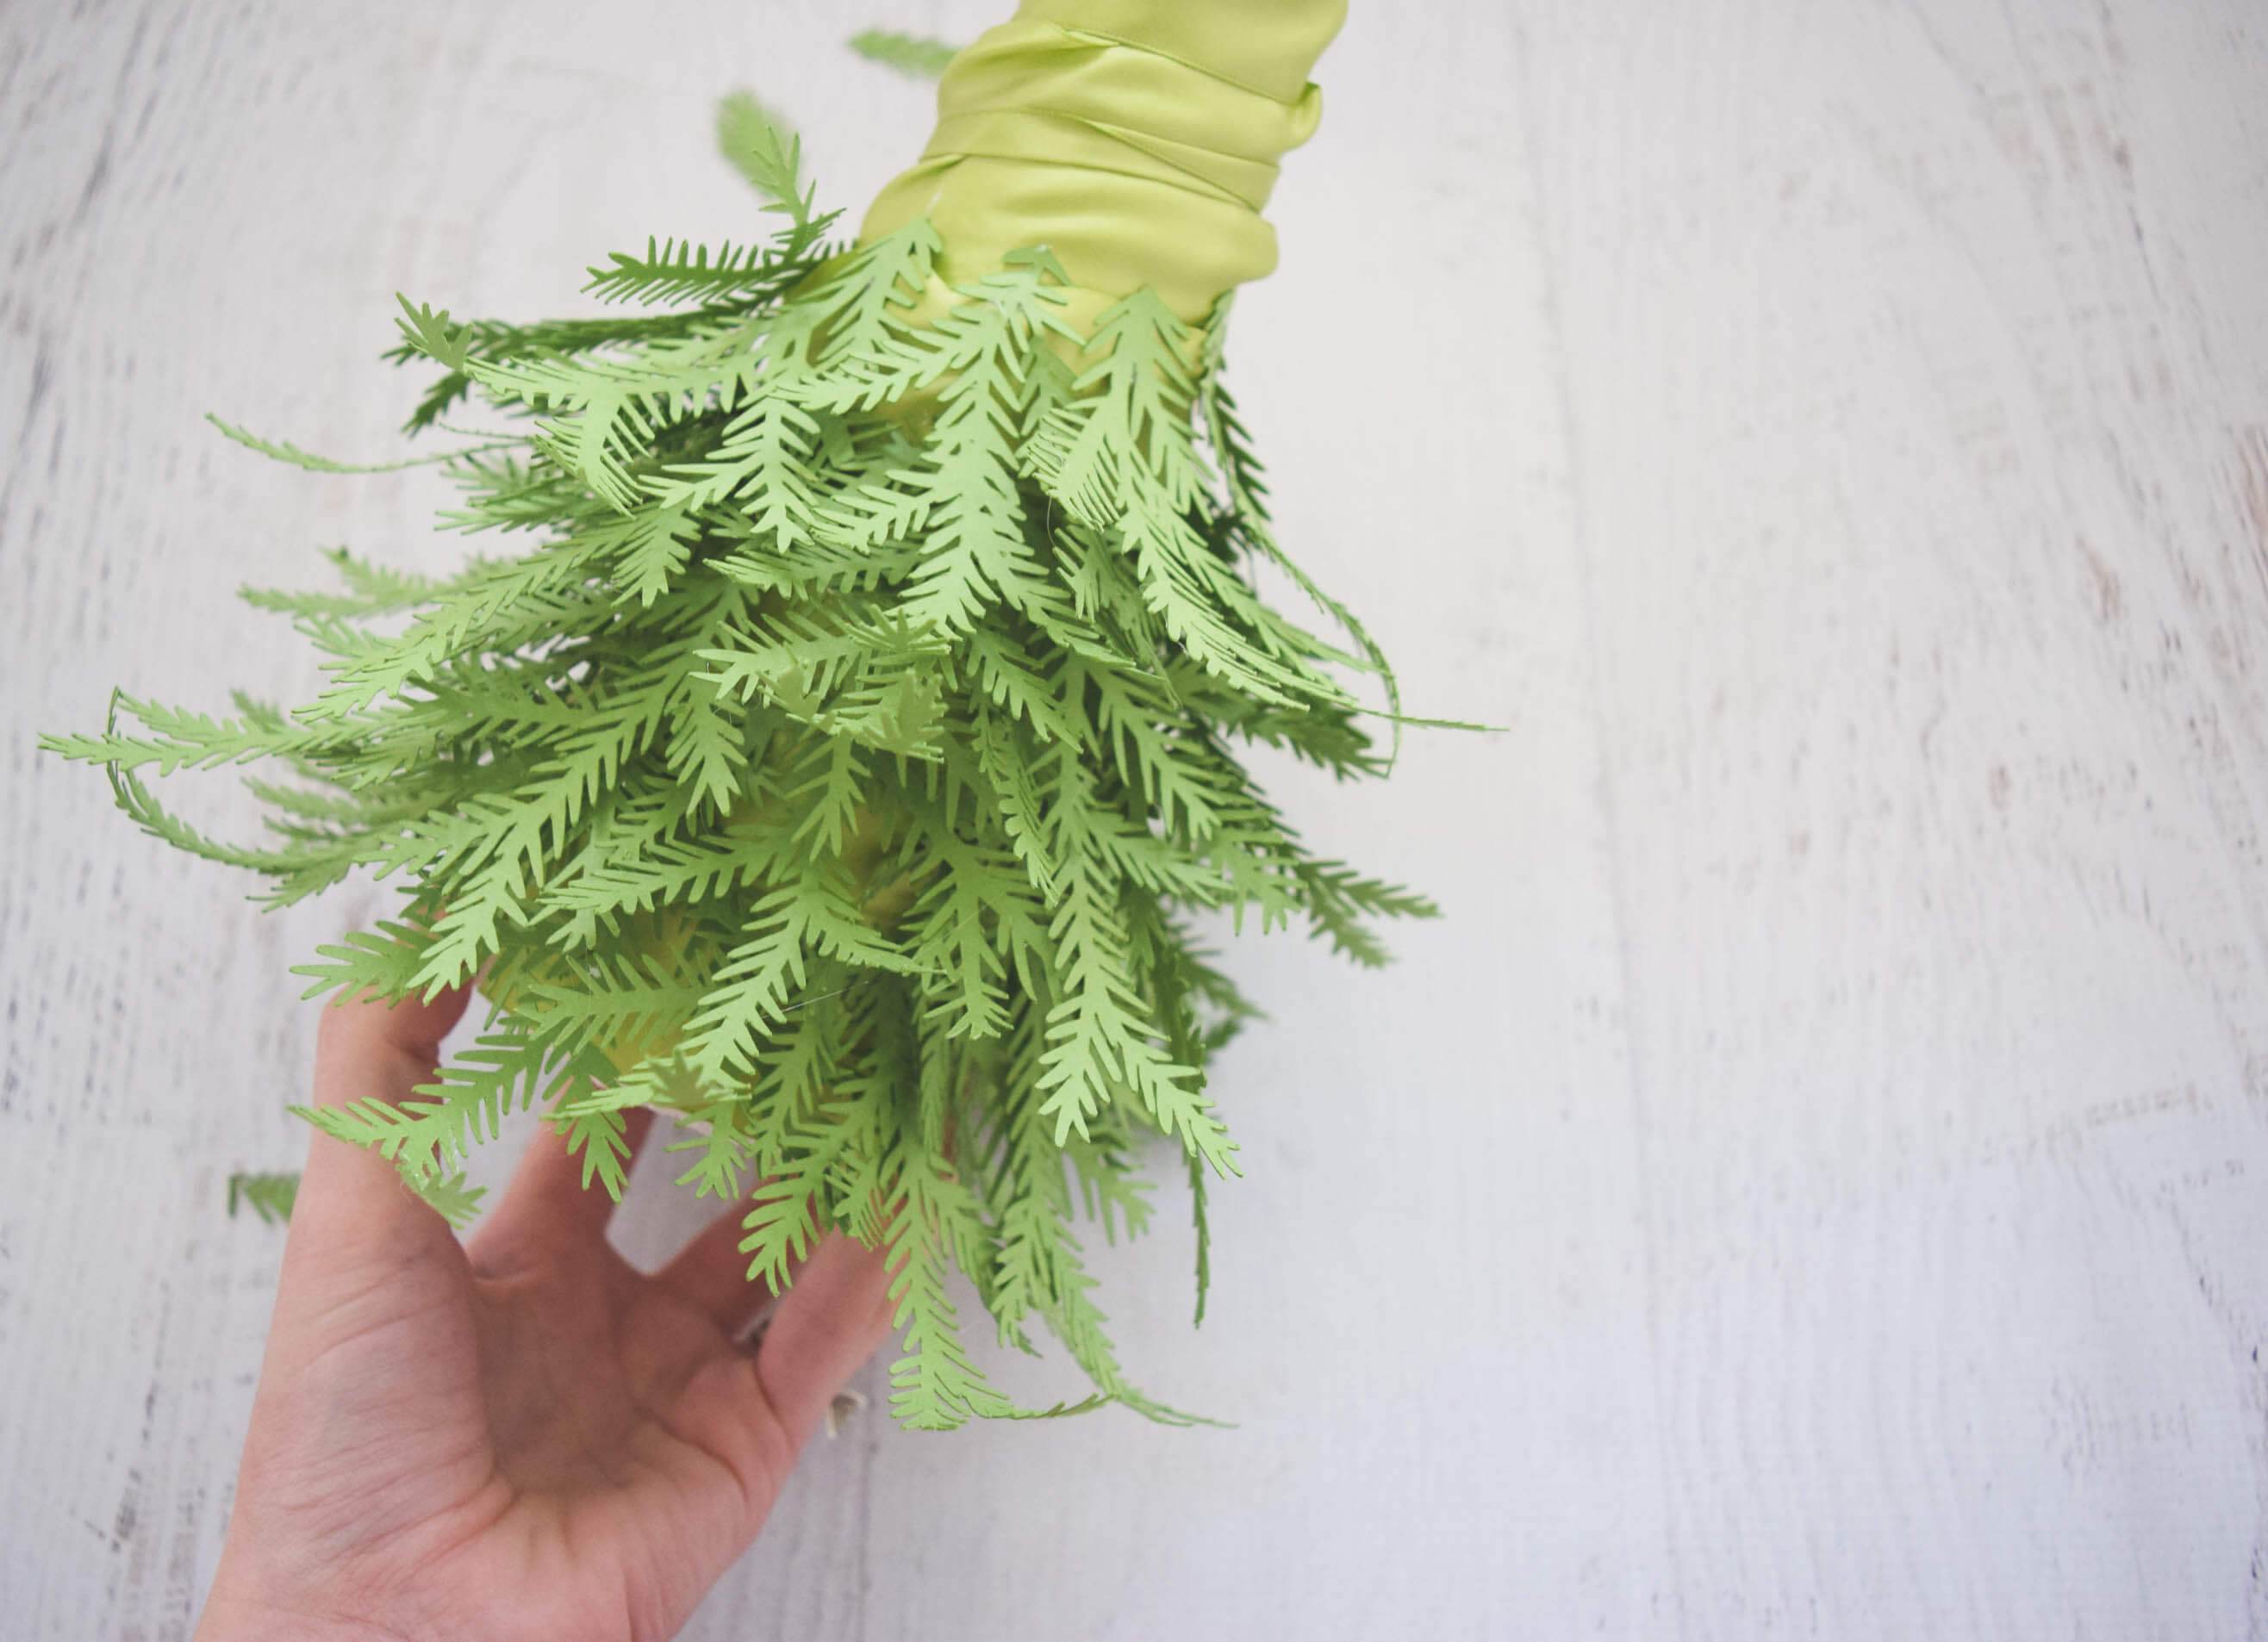 A woman's hand holds the in-progress paper Christmas tree, half-way filled with green paper pine leaf branches.